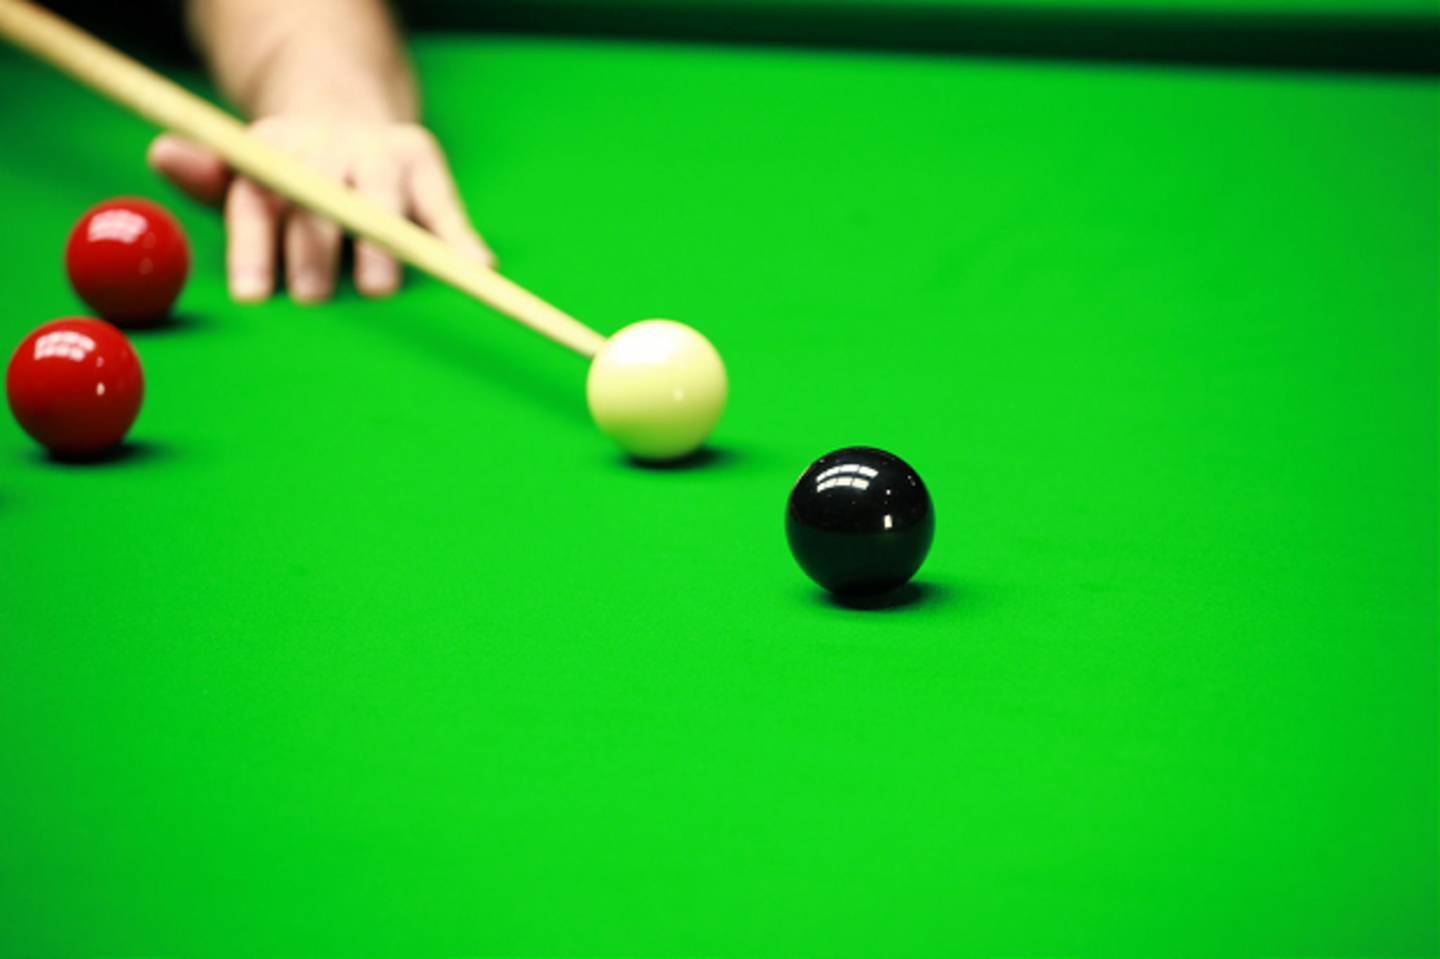 A player taking a shot in snooker